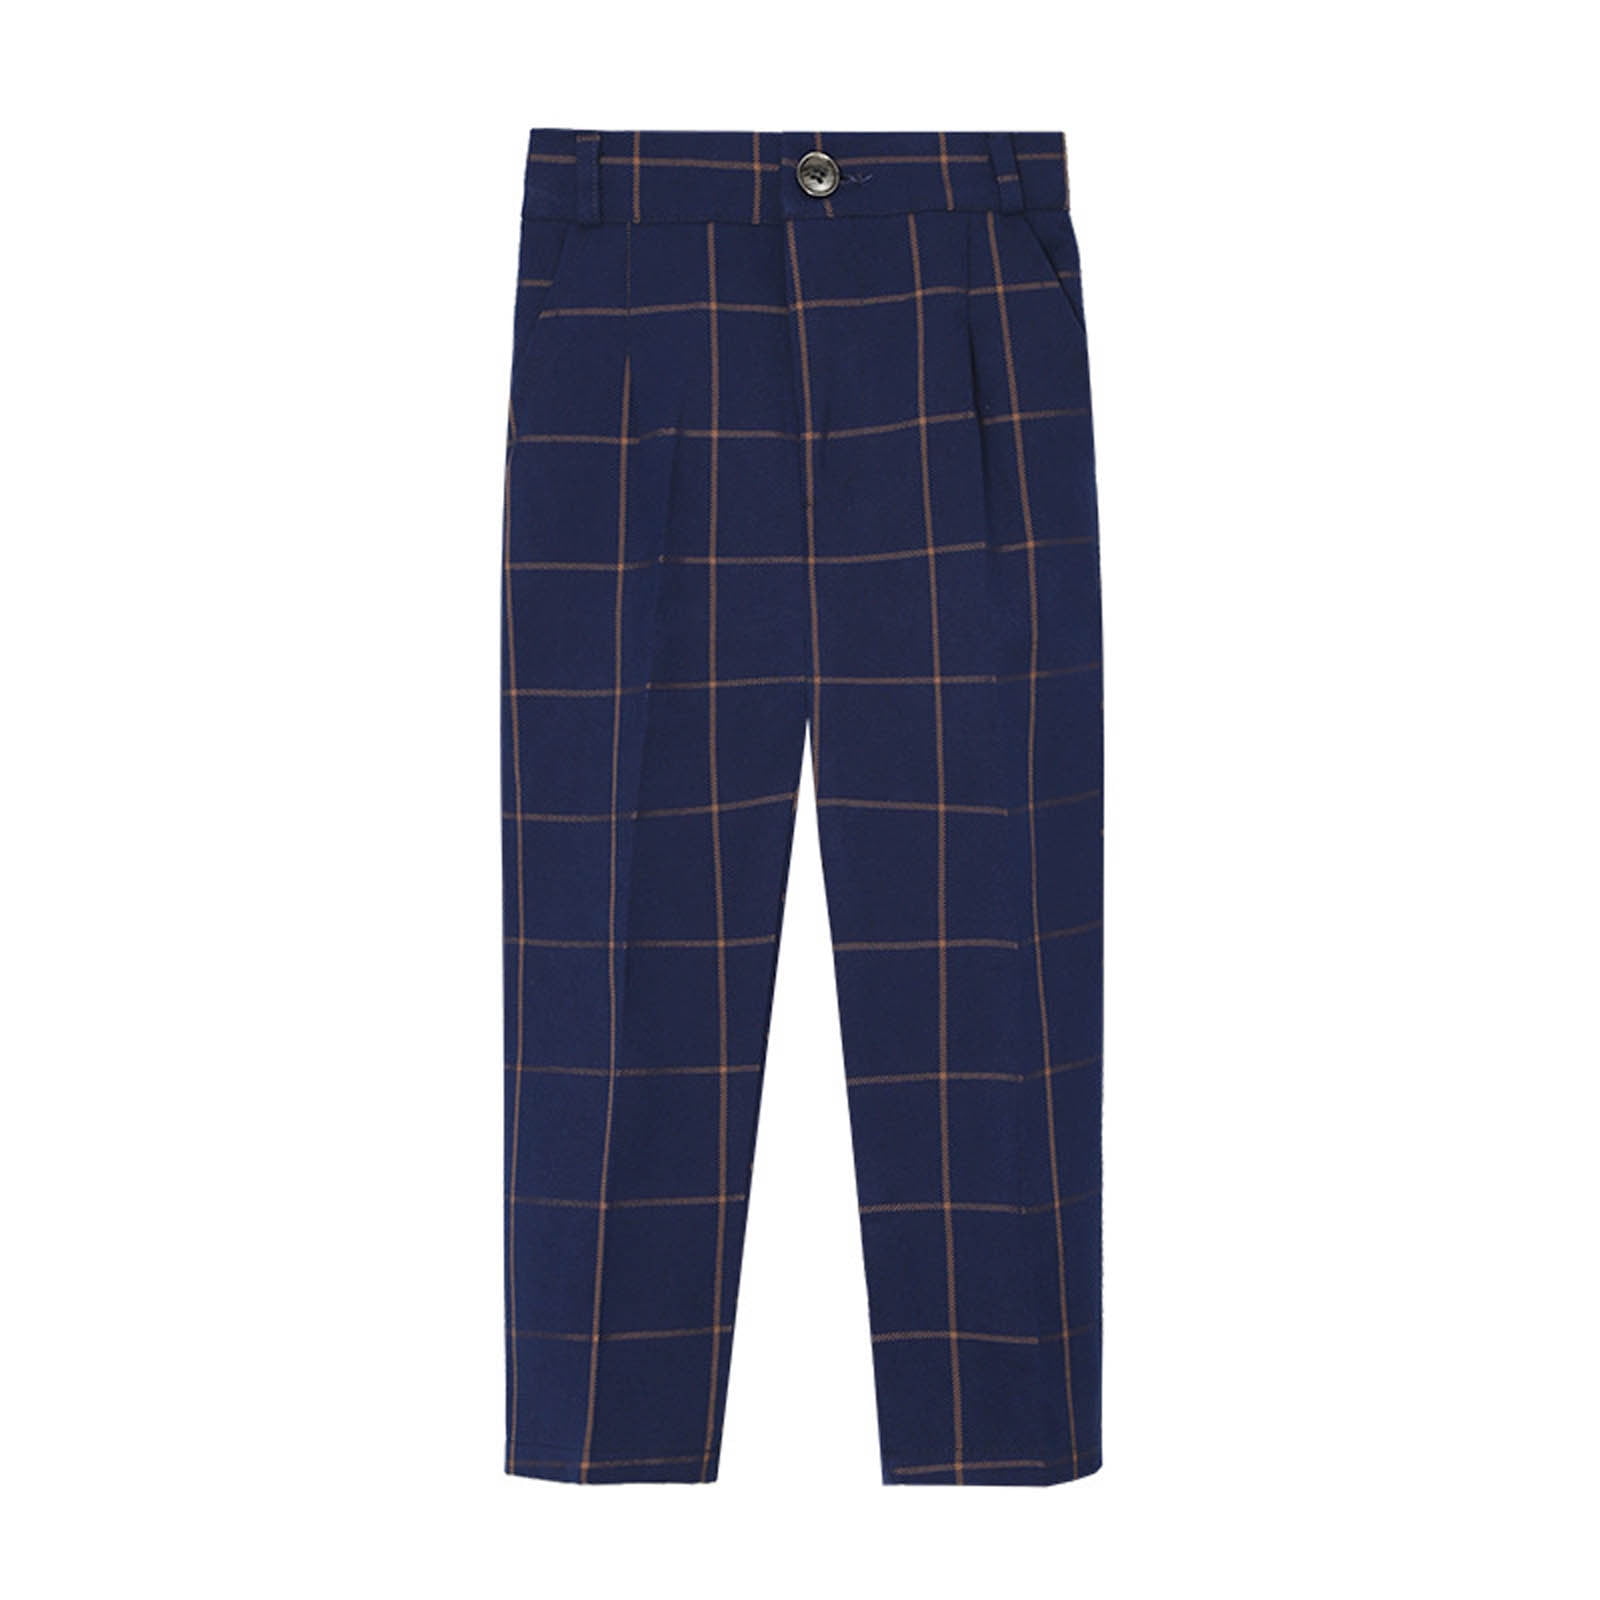 Boys' formal pants & trousers, compare prices and buy online